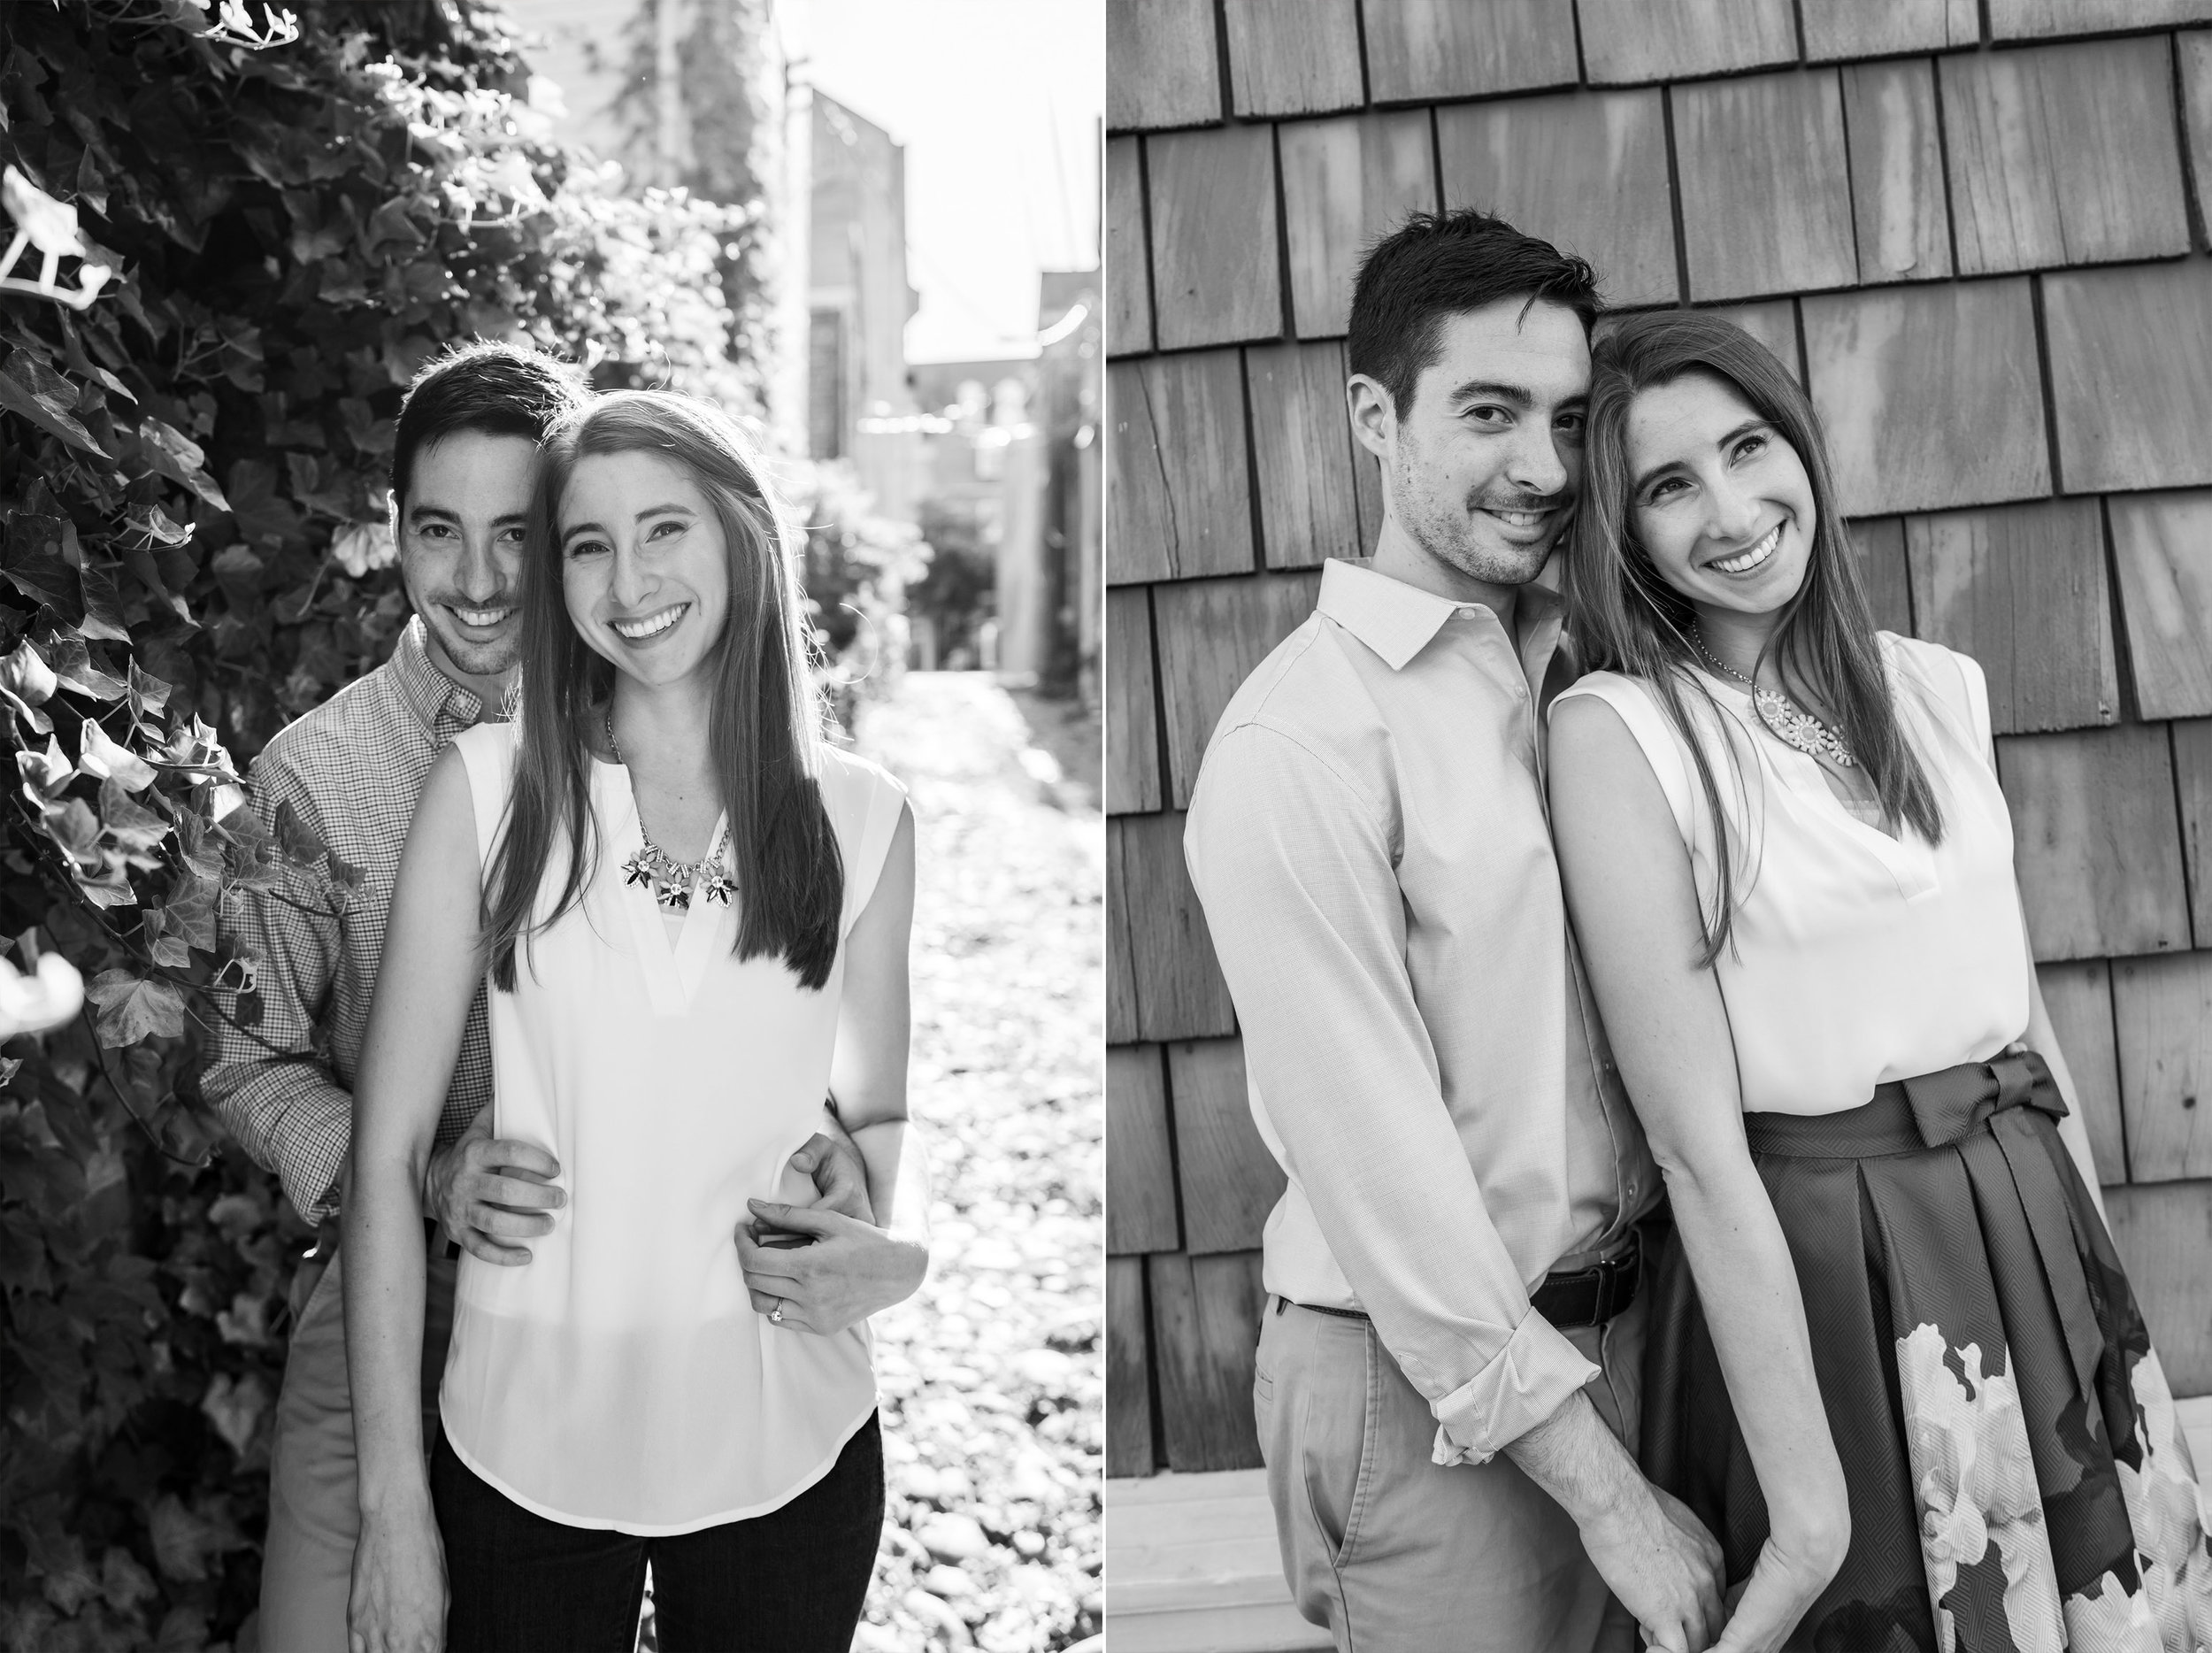 Engagement photos in old town alexandria in black and white